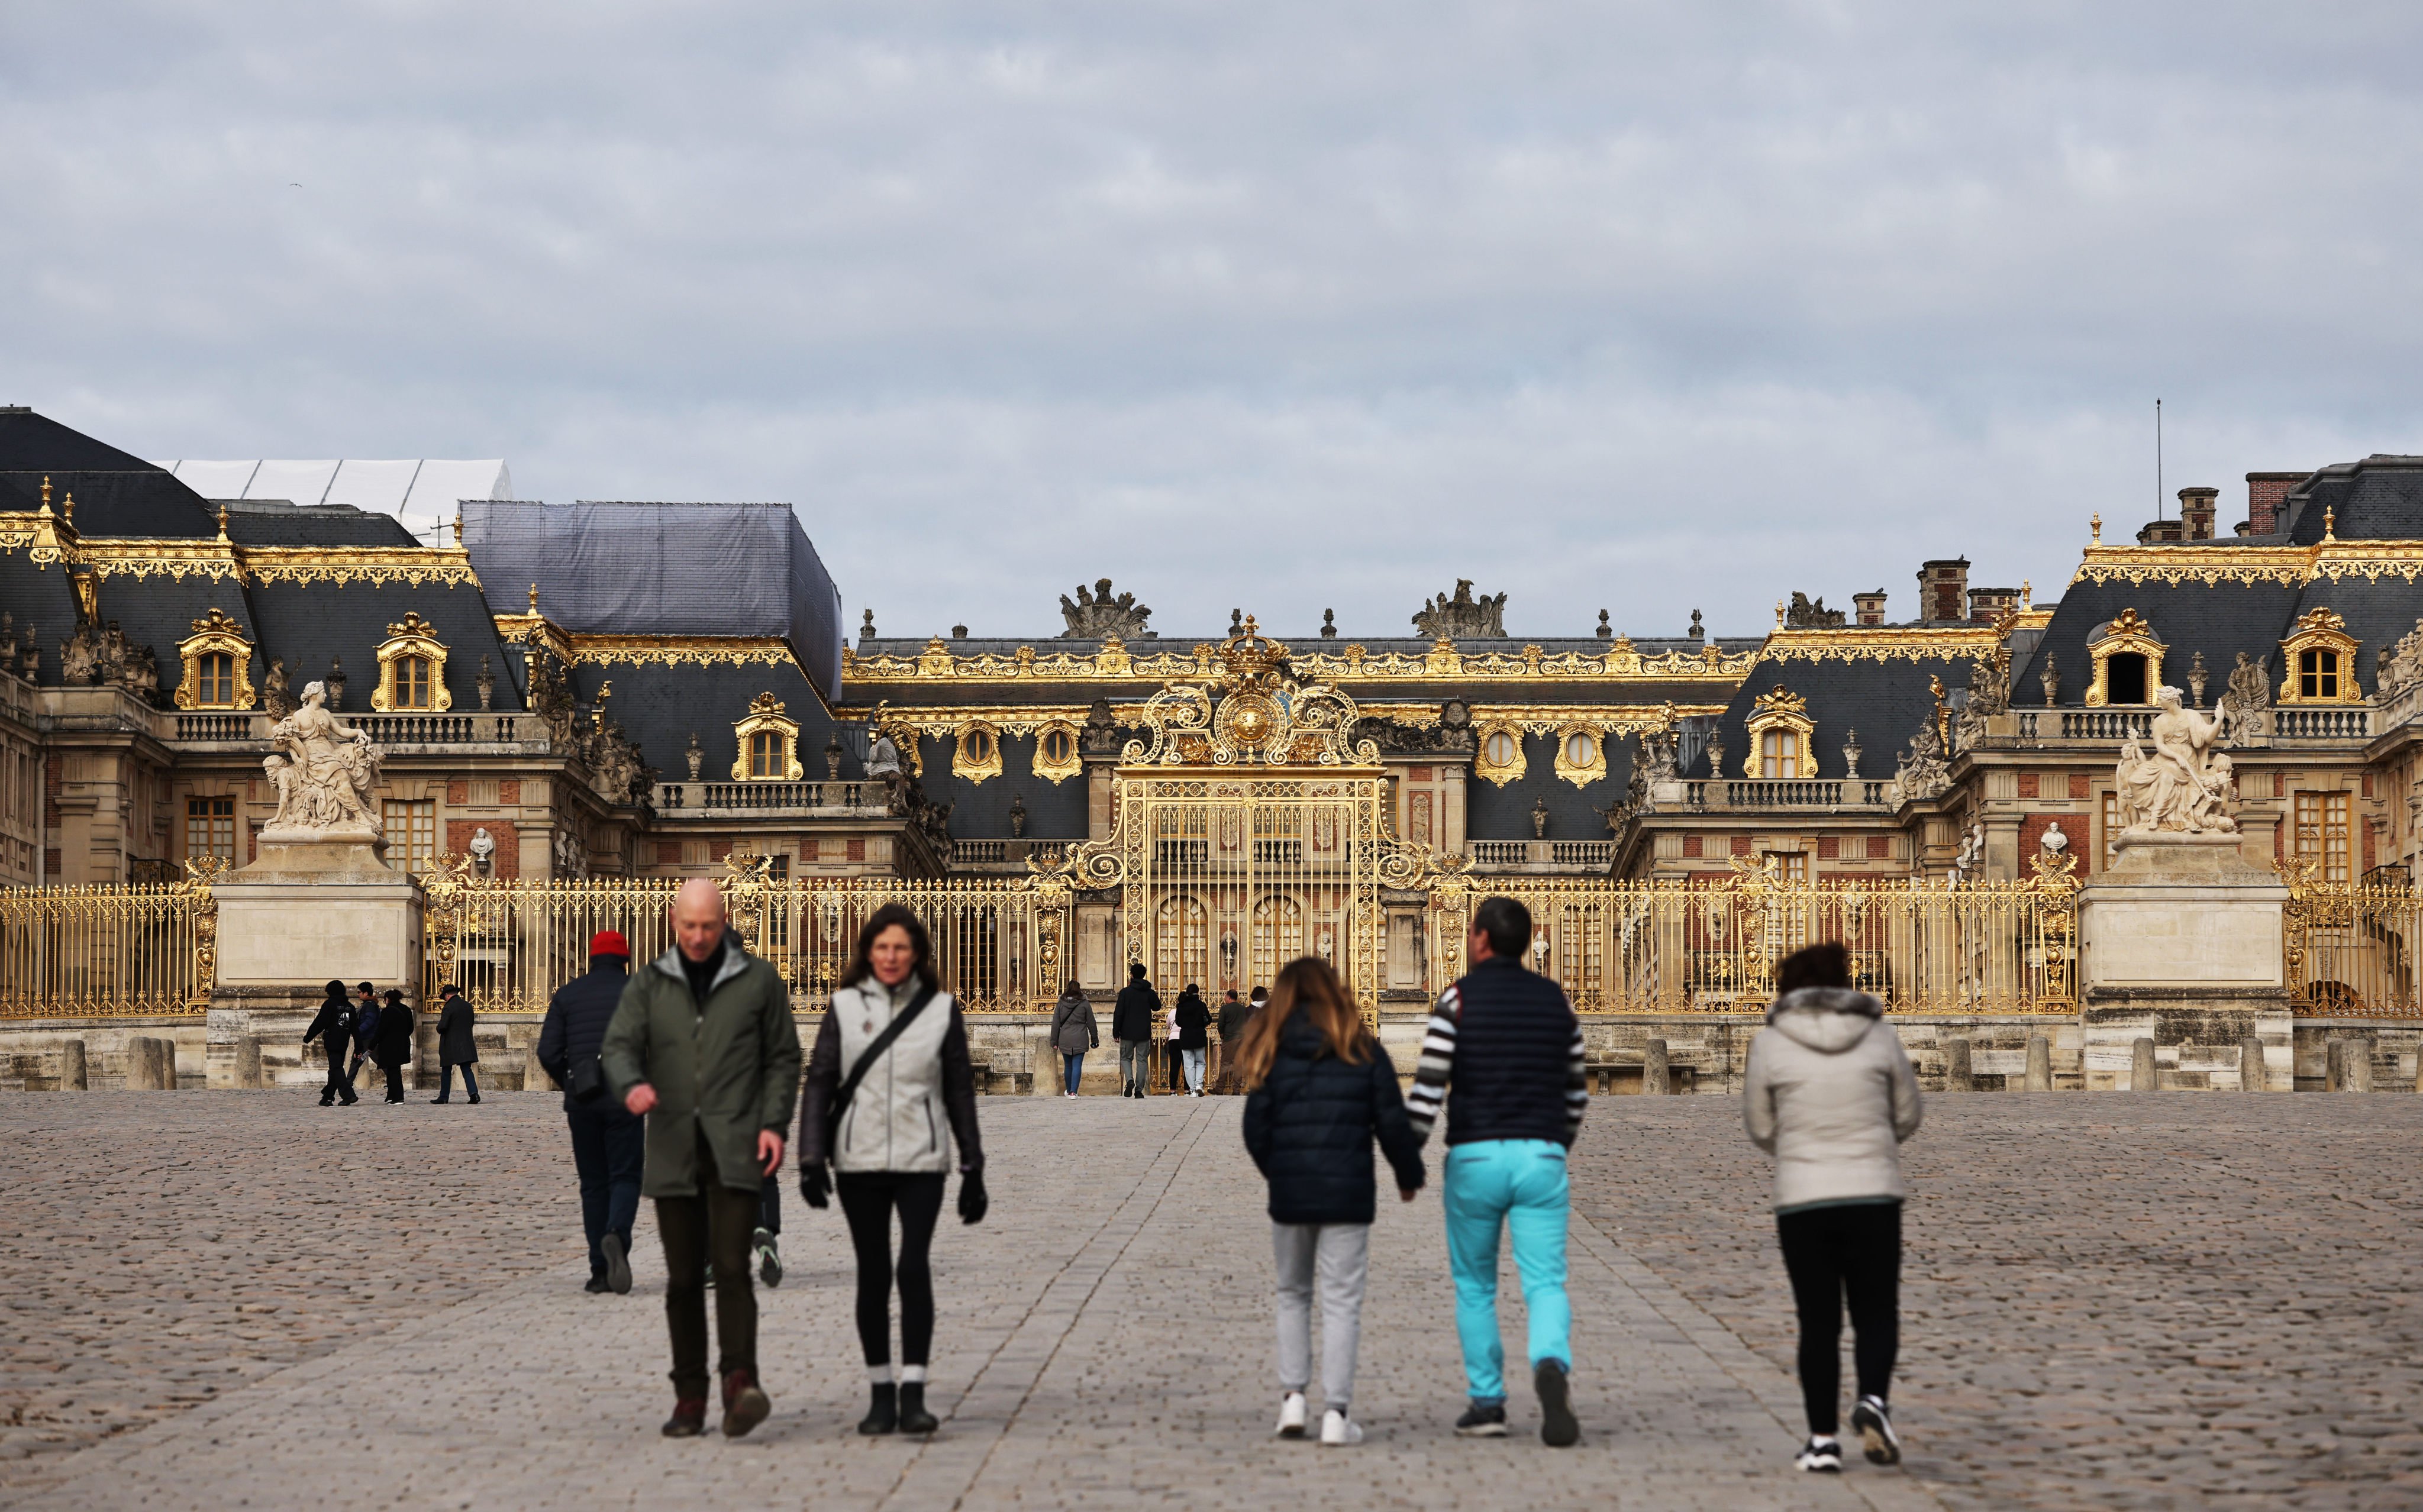 The Palace of Versailles in Paris. Its museum director says the share of Chinese visitors to the site has dropped since the pandemic. Photo: Xinhua